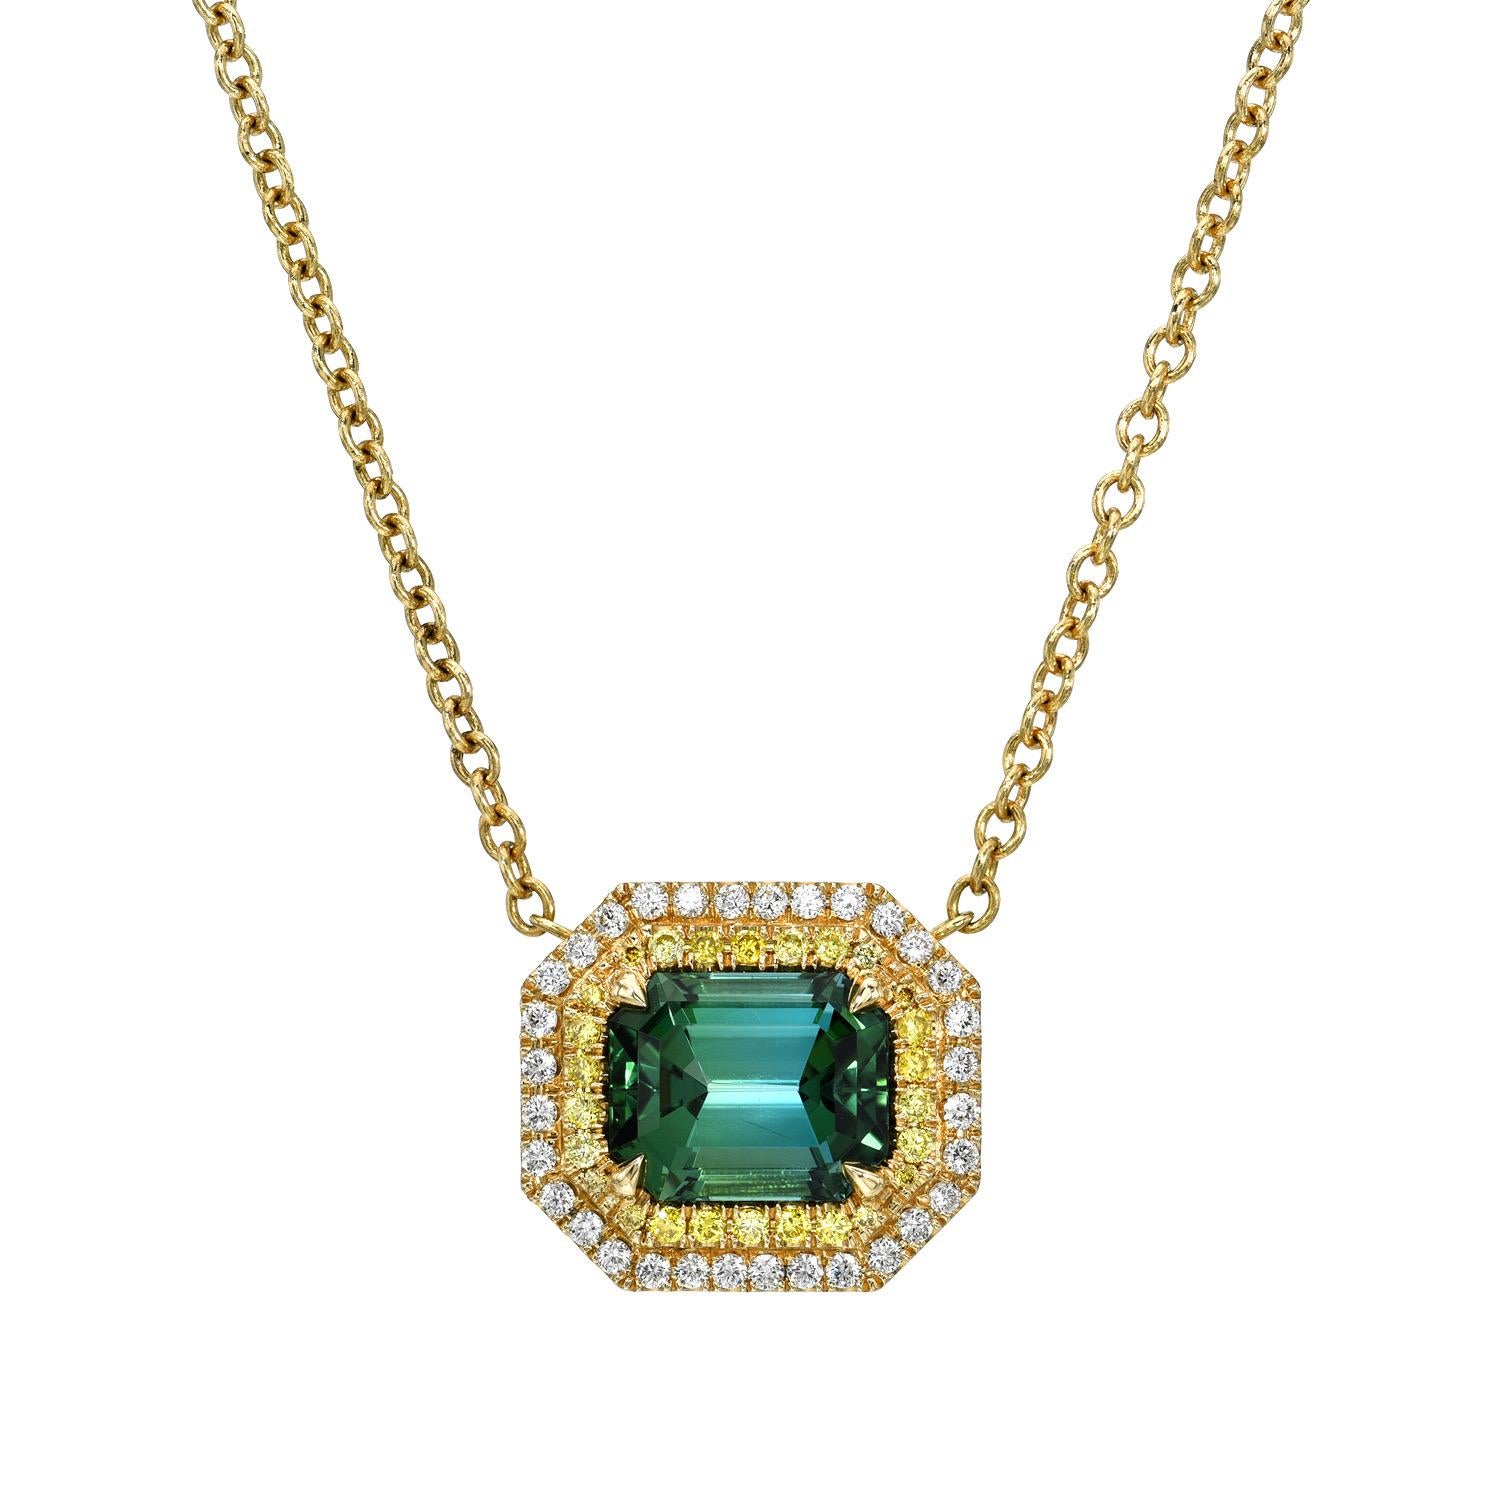 18K yellow gold necklace set with a 3.38 carat Blue-Green Tourmaline emerald-cut, decorated with a double halo set with a total of 0.18 carat fancy intense yellow diamonds, VS-SI1, and a total of 0.24 carat F-G/VS round brilliant diamonds.

Returns